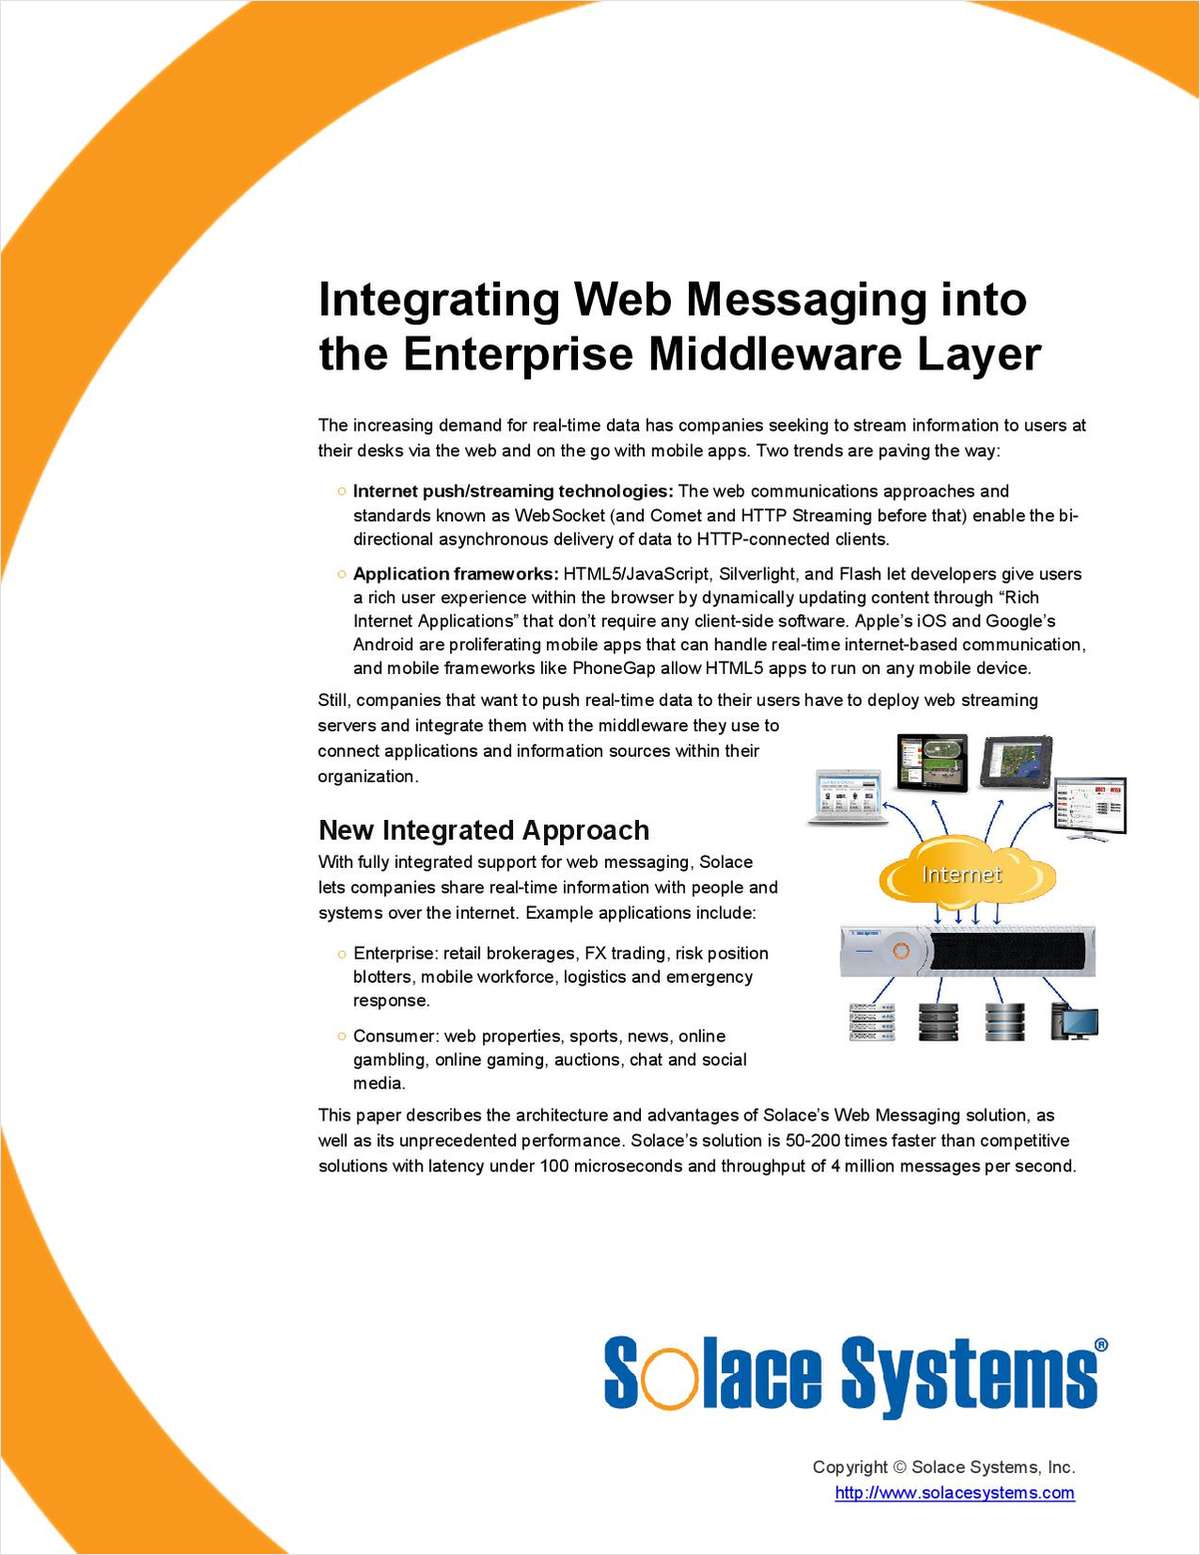 Integrating Web Messaging into the Enterprise Middleware Layer